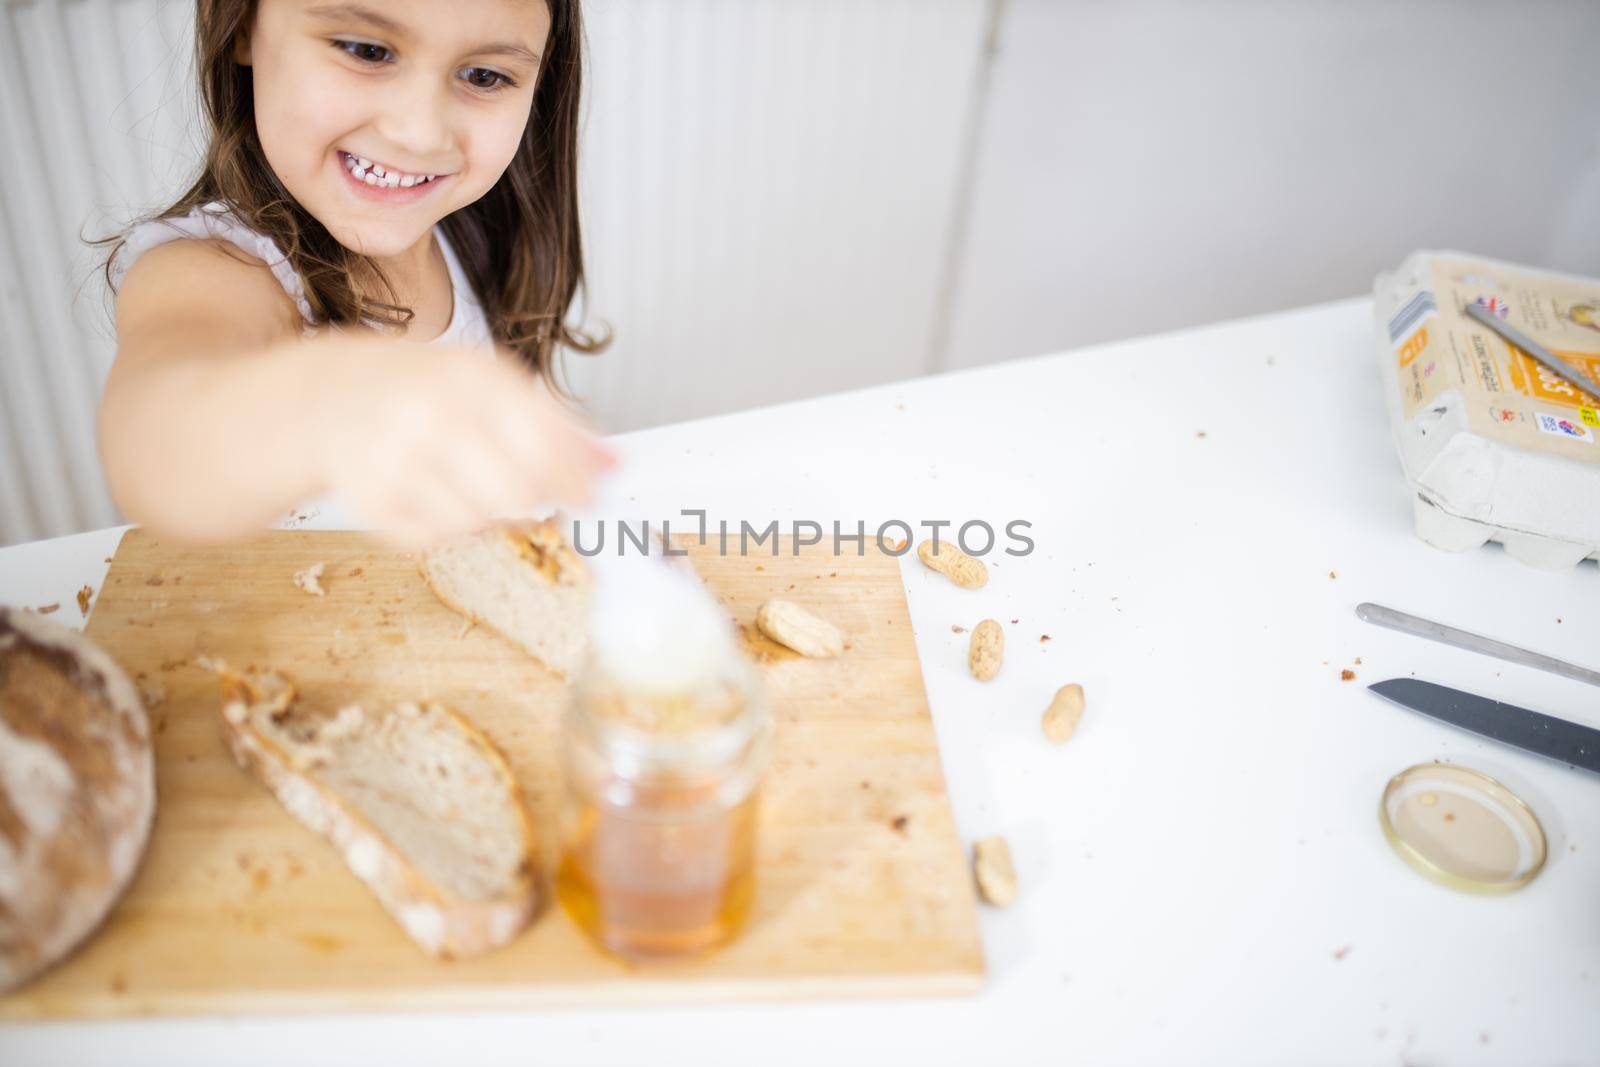 Happy little girl picking honey from jar next to a slice of bread above wooden cutting board. Young child at white table sticking a spoon into honey jar. Sweet and light breakfast